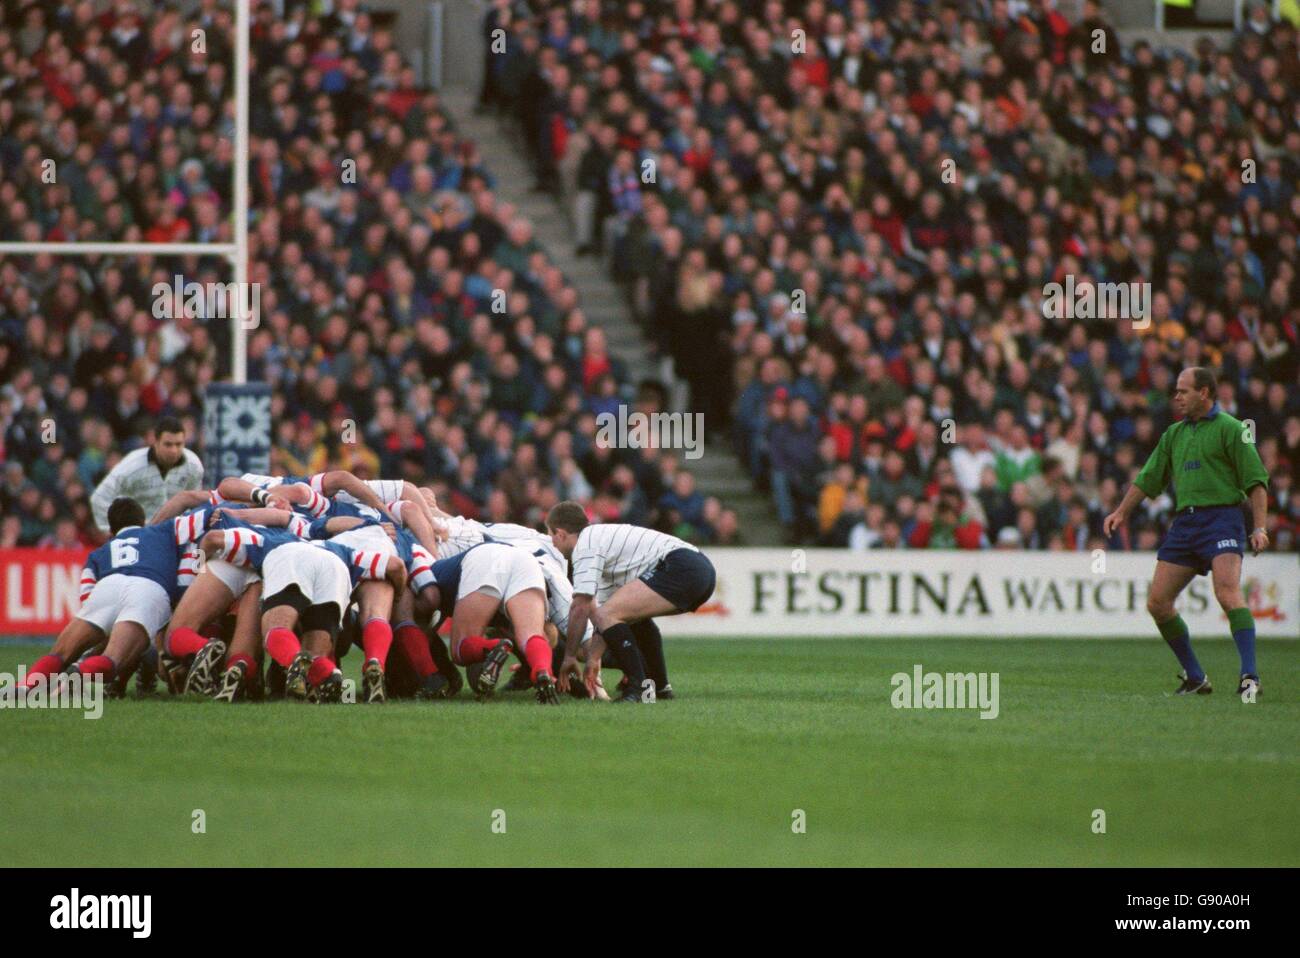 Rugby Union - Five Nations Championship - Scotland v France